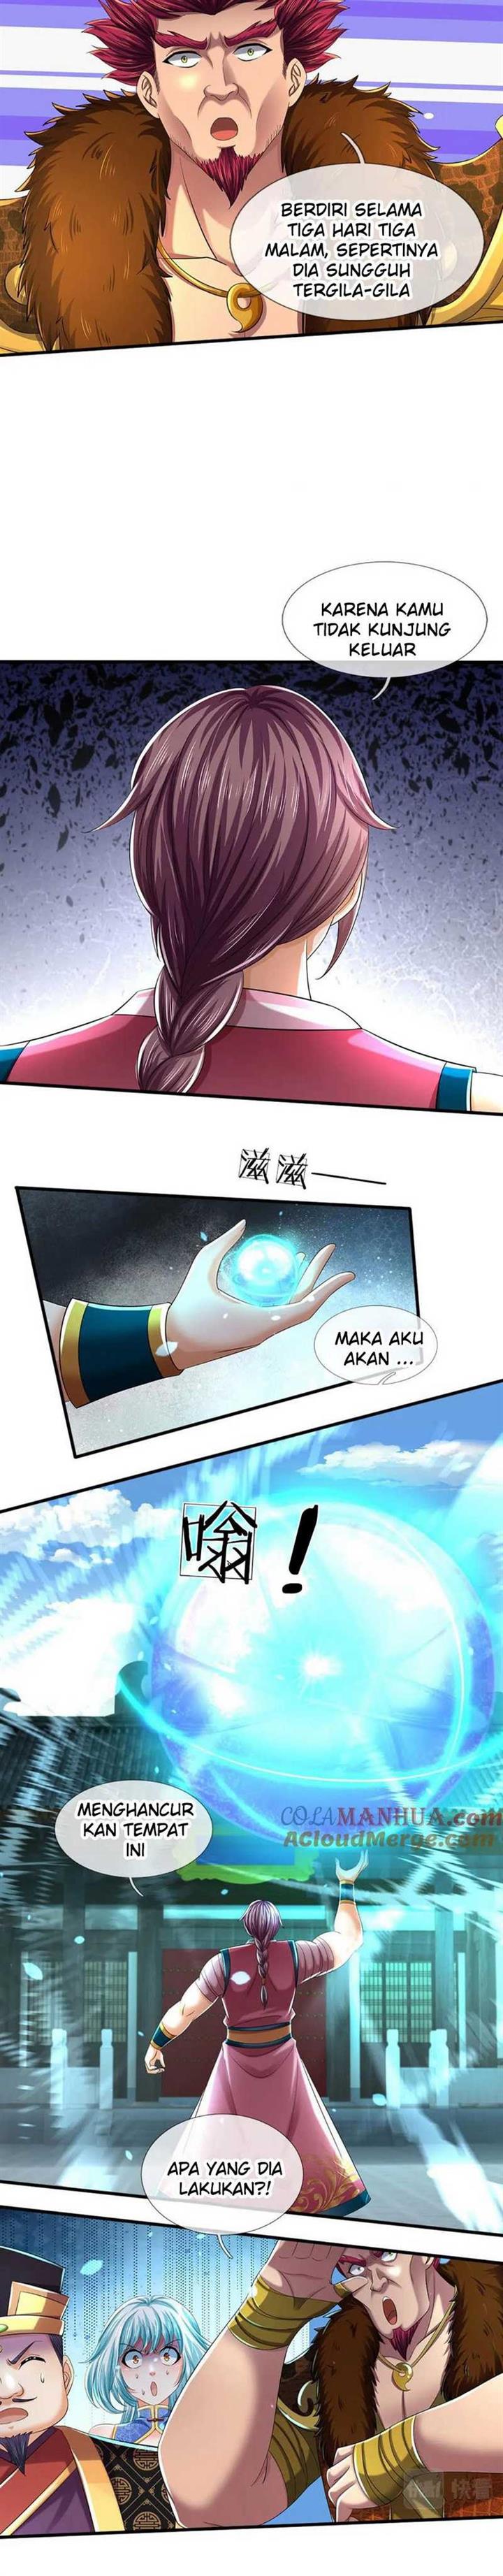 Star Sign In To Supreme Dantian Chapter 234